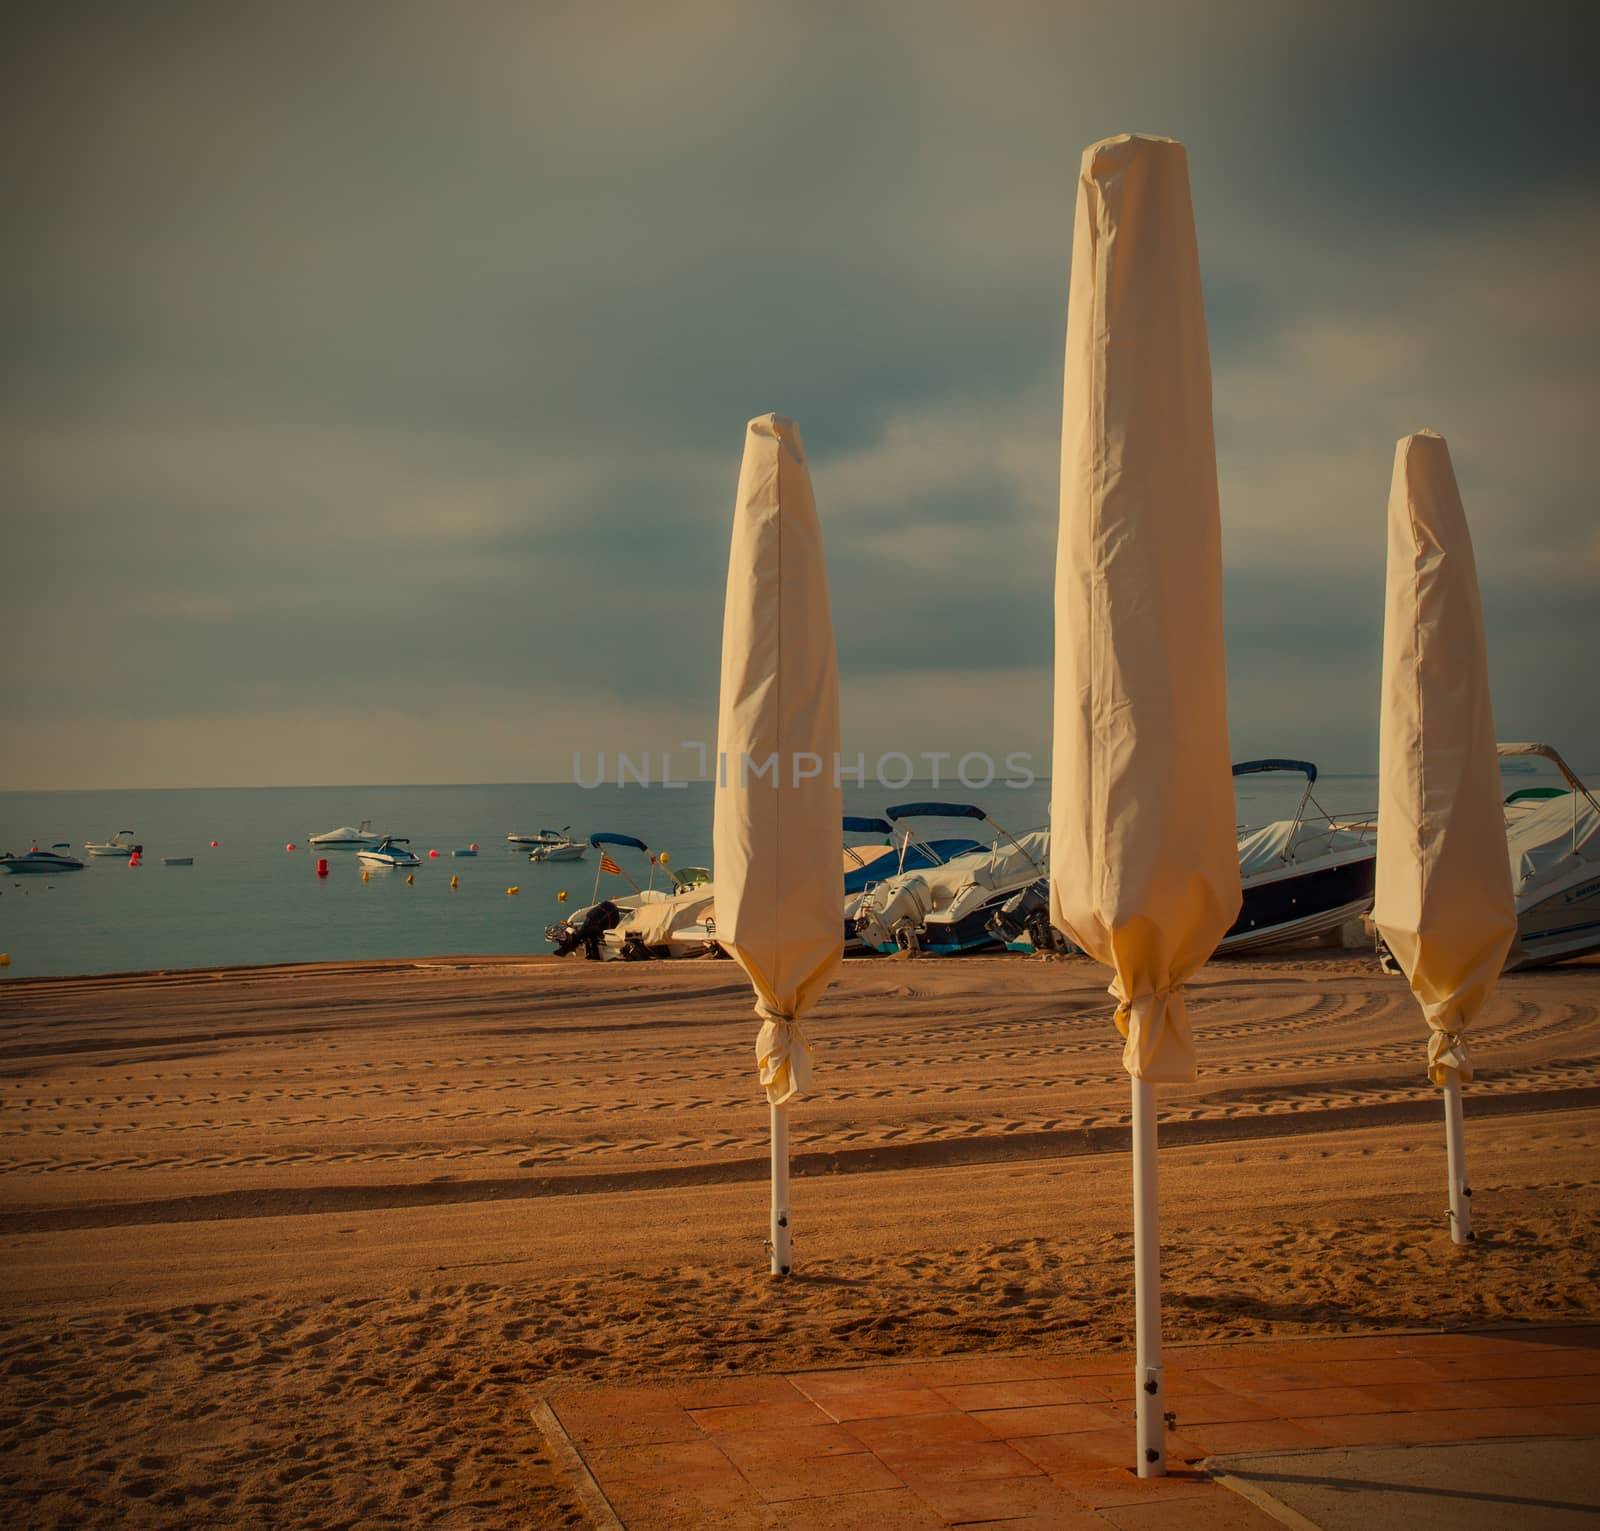 beach, folded umbrellas, early morning, instagram image style